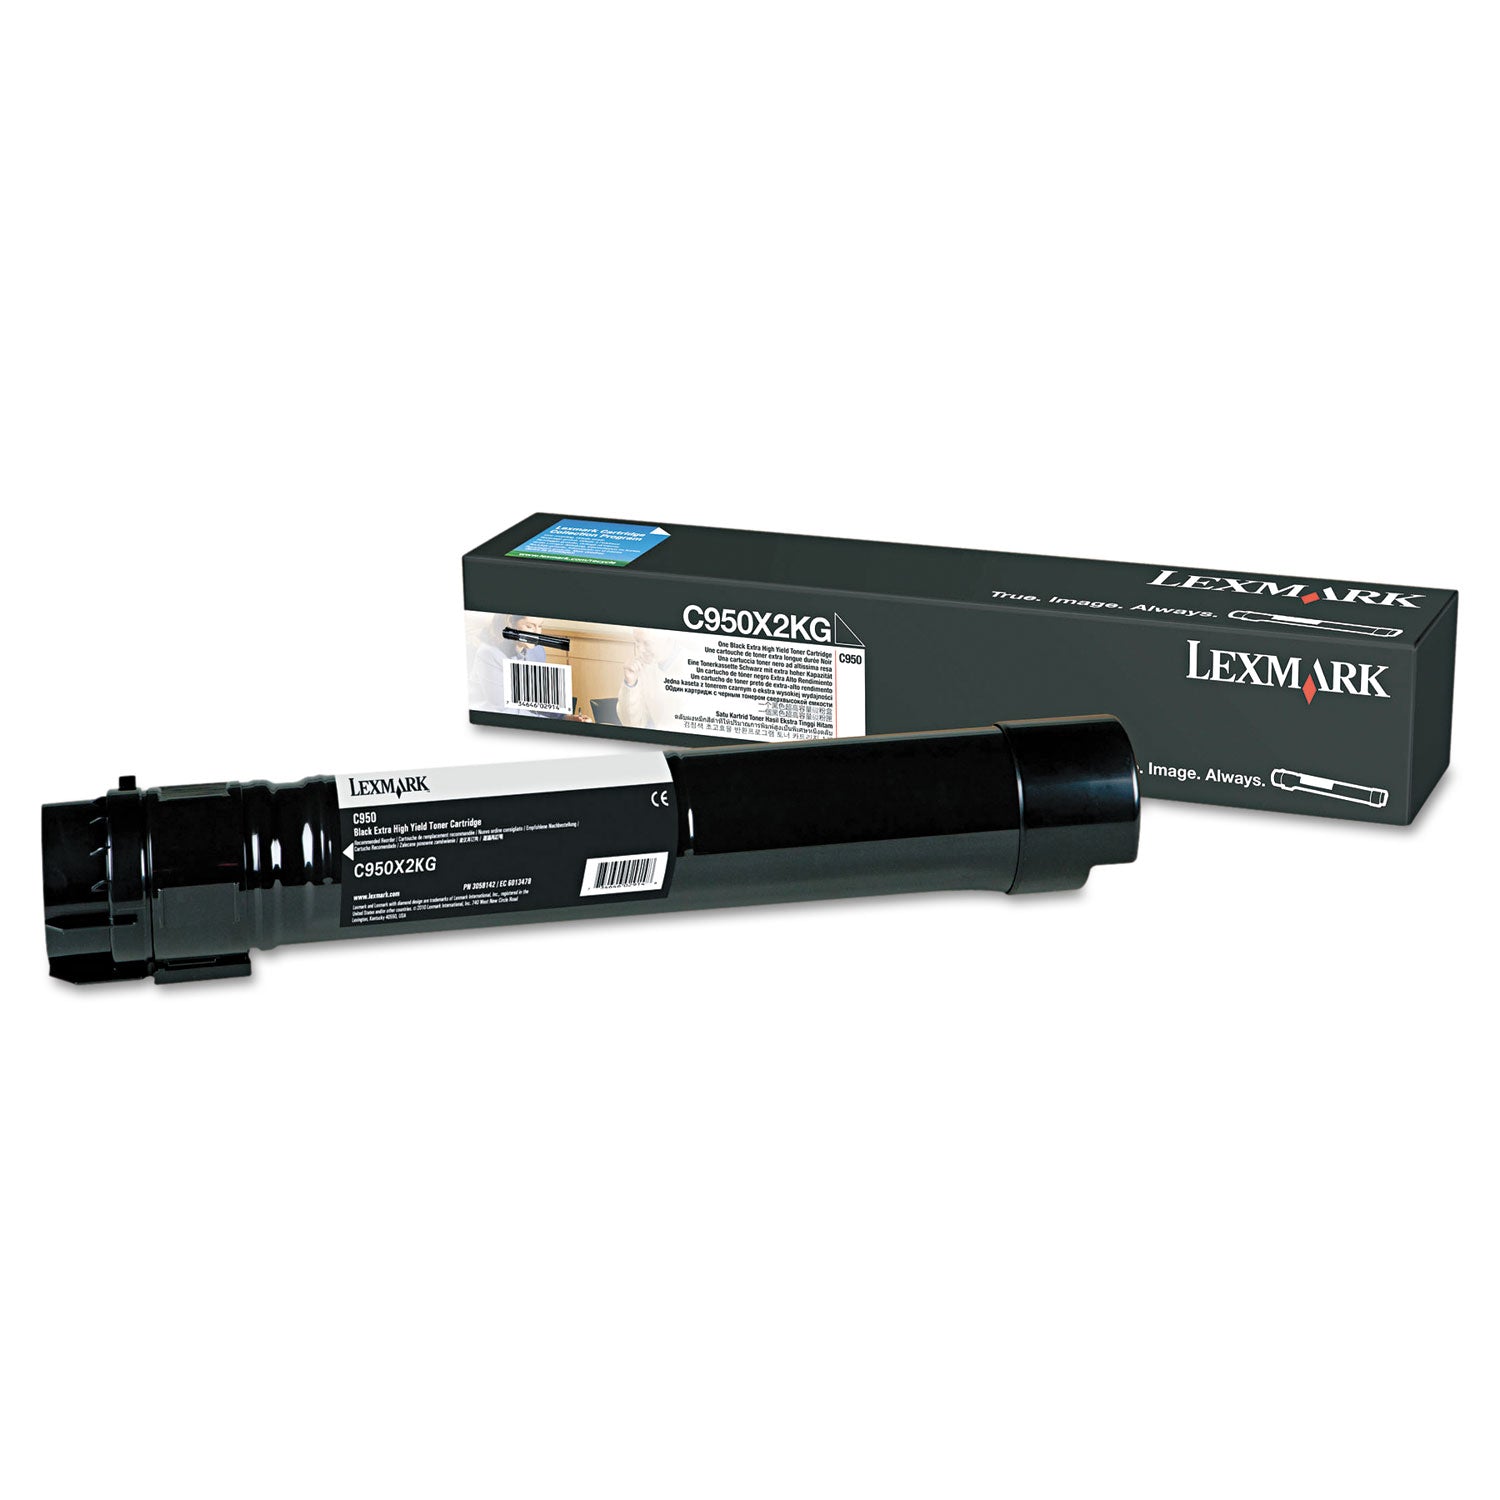 C950X2KG Extra High-Yield Toner, 32,000 Page-Yield, Black - 